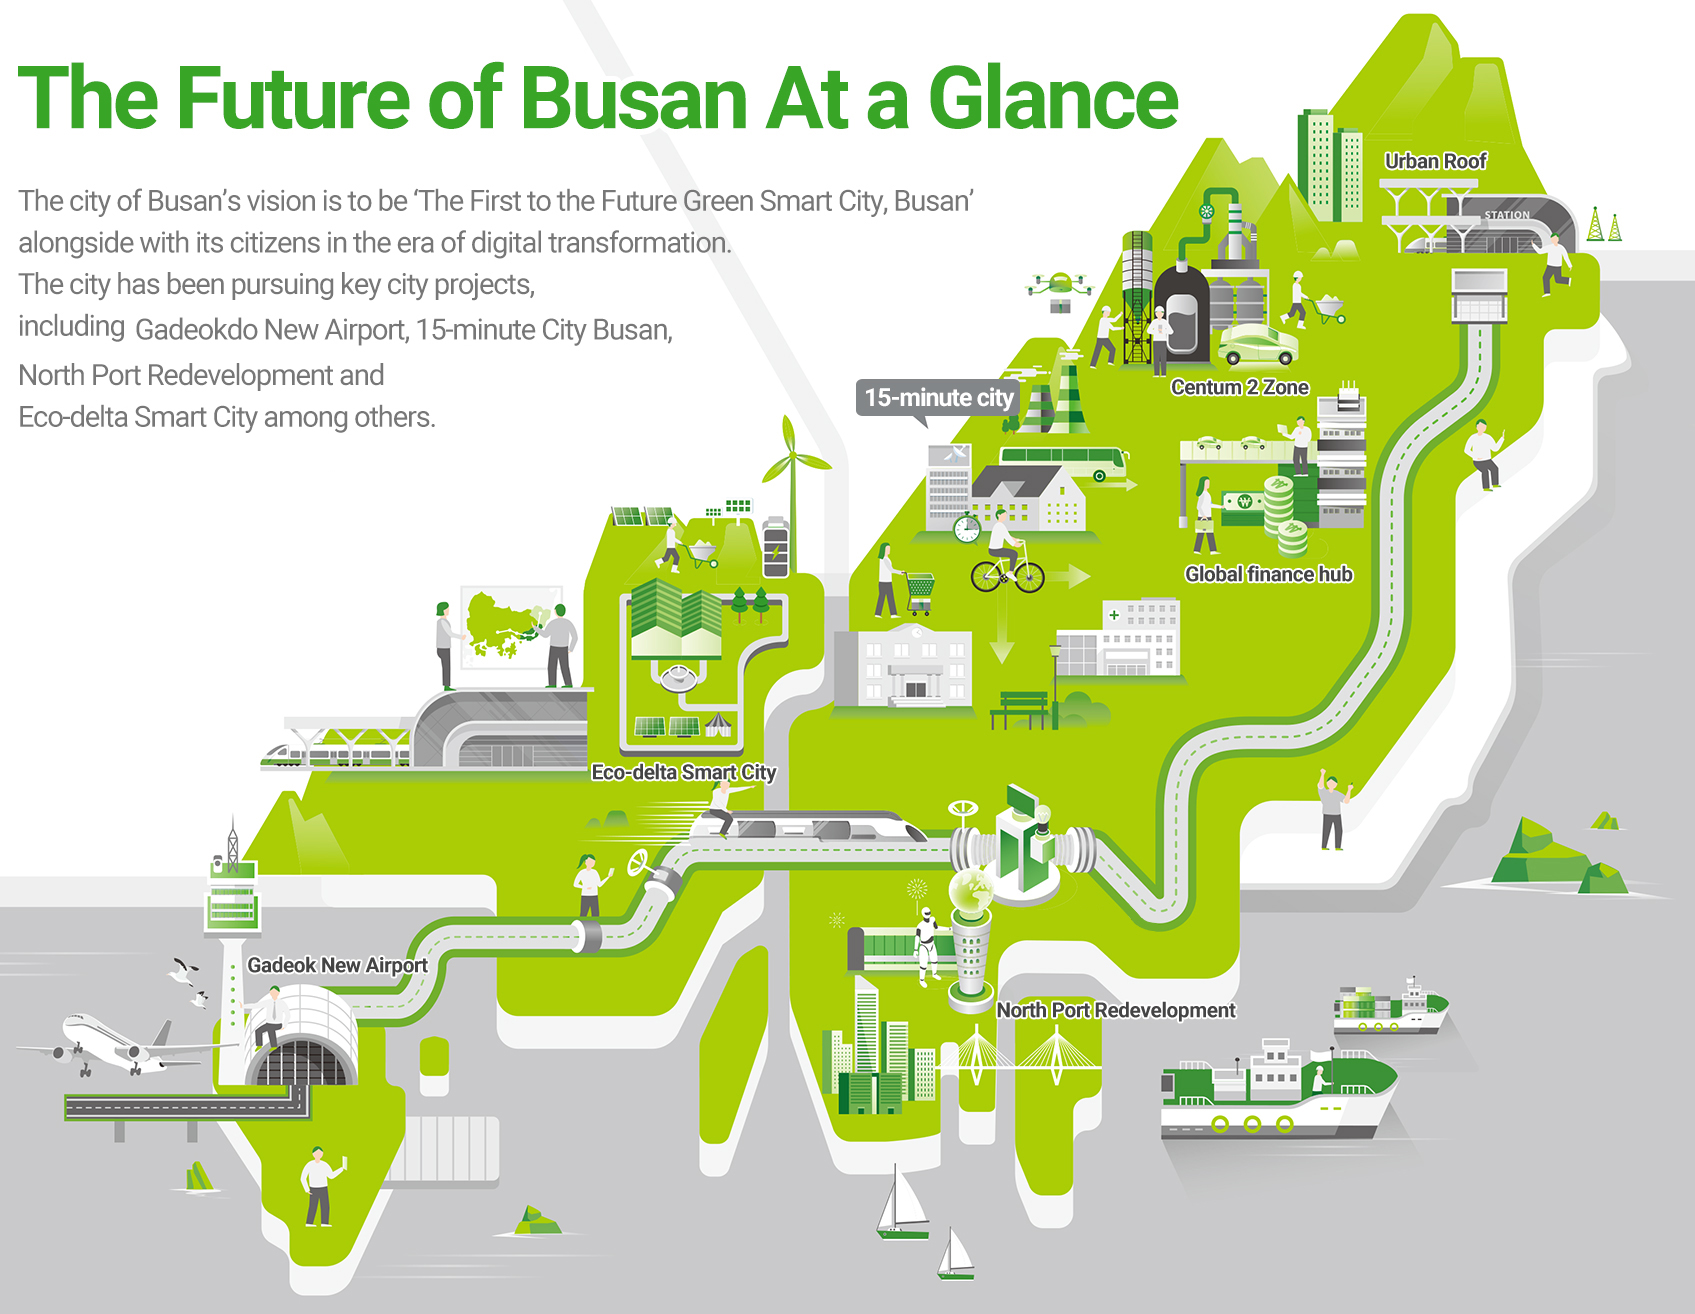 The Future of Busan At a Glance 
    The city of Busan’s vision is to be ‘The First to the Future Green Smart City, Busan’ alongside with its citizens in the era of digital transformation. The city has been pursuing key city projects, including Gadeokdo New Airport, 15-minute City Busan, North Port Redevelopment and Eco-delta Smart City among others.
    Urban Roof, Centum 2 Zone, 15-minute city, Global finance hub, Eco-delta Smart City, Gadeok New Airport, North Port Redevelopment